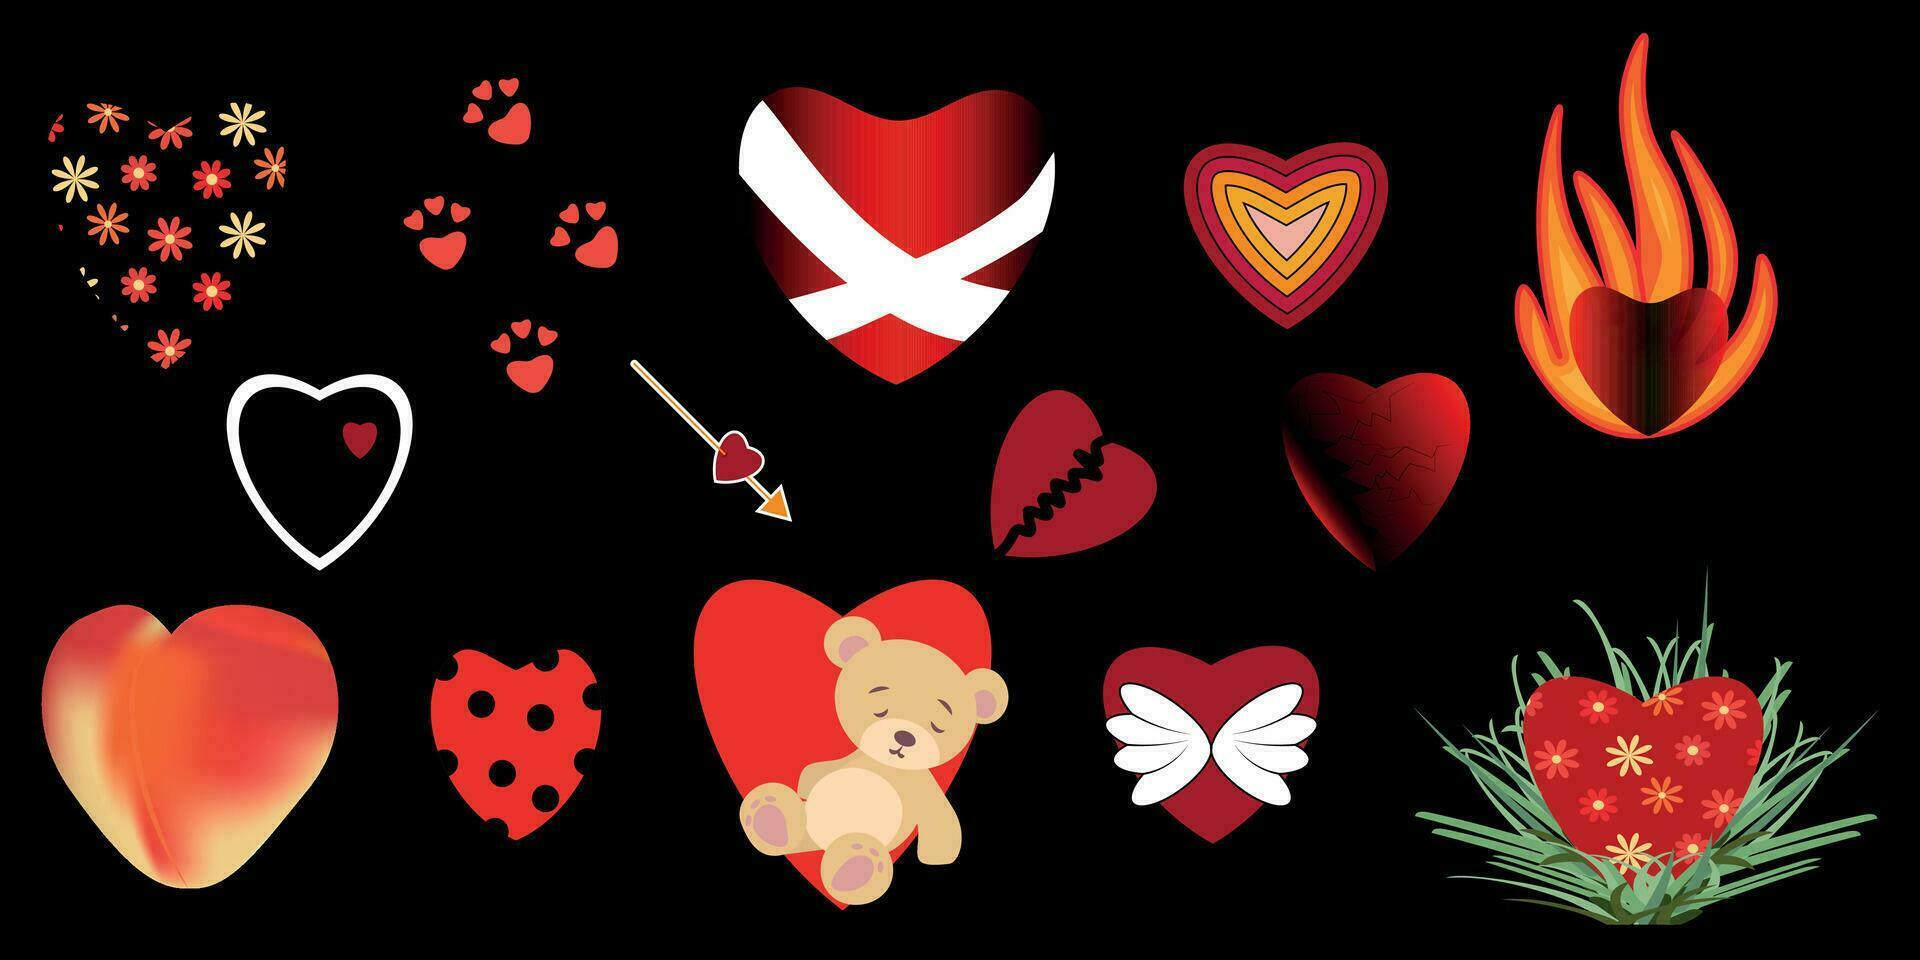 Lovely Hearts Sticker Set Love Concept Happy Crazy Images of Hearts vector